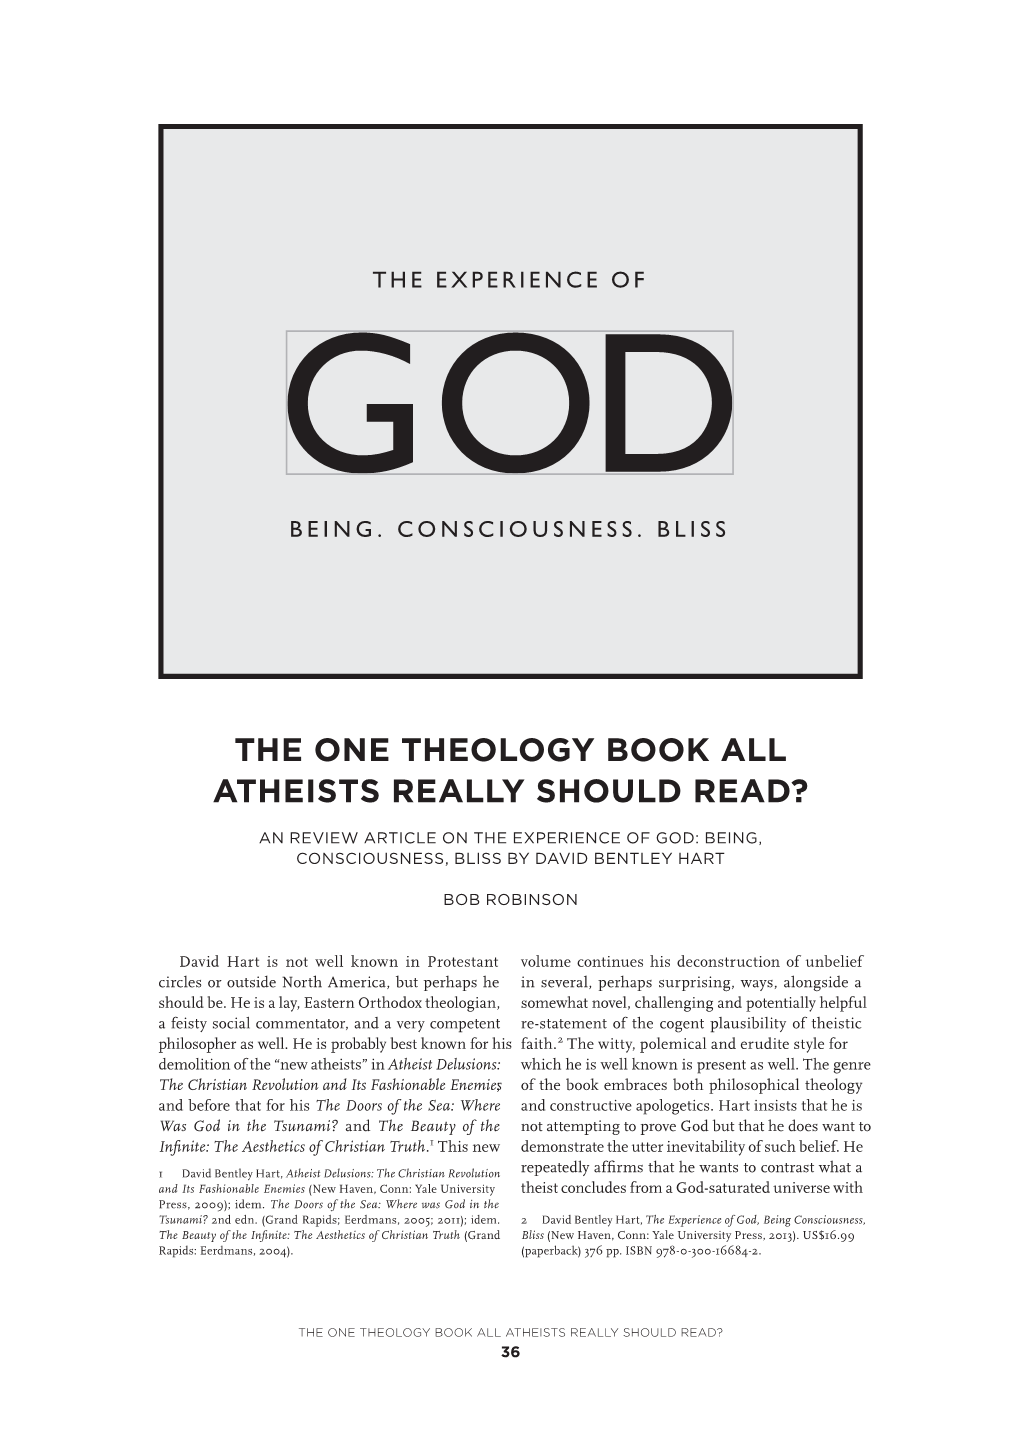 The One Theology Book All Atheists Really Should Read?